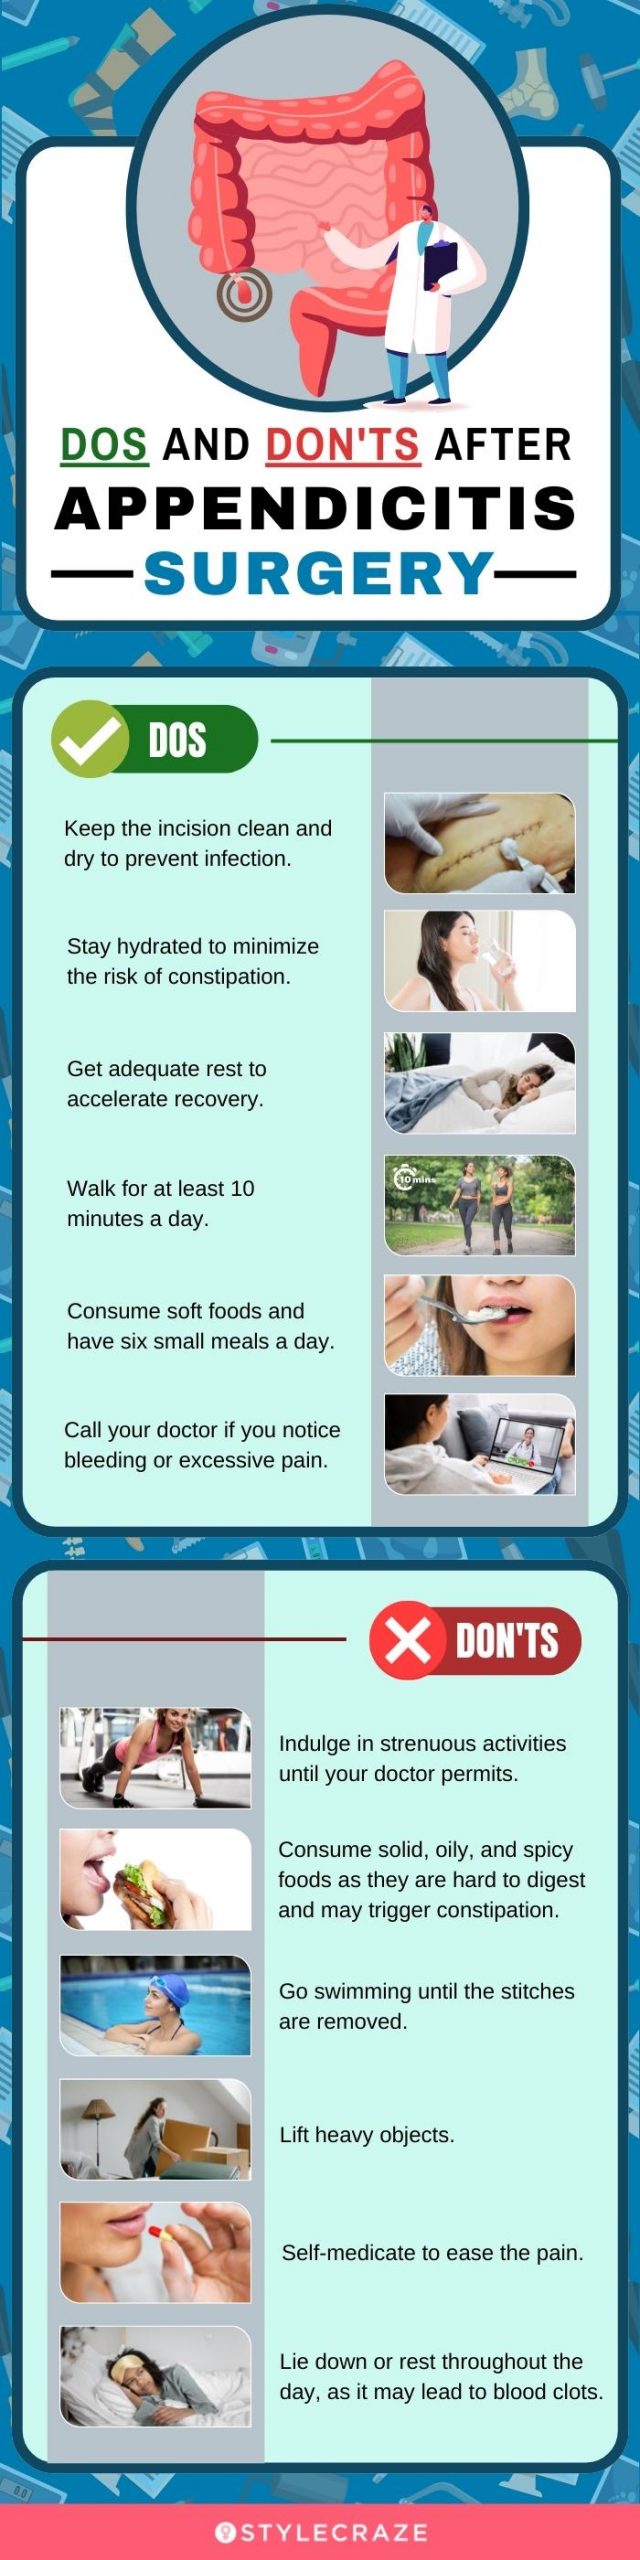 dos and don'ts after appendicitis surgery (infographic)